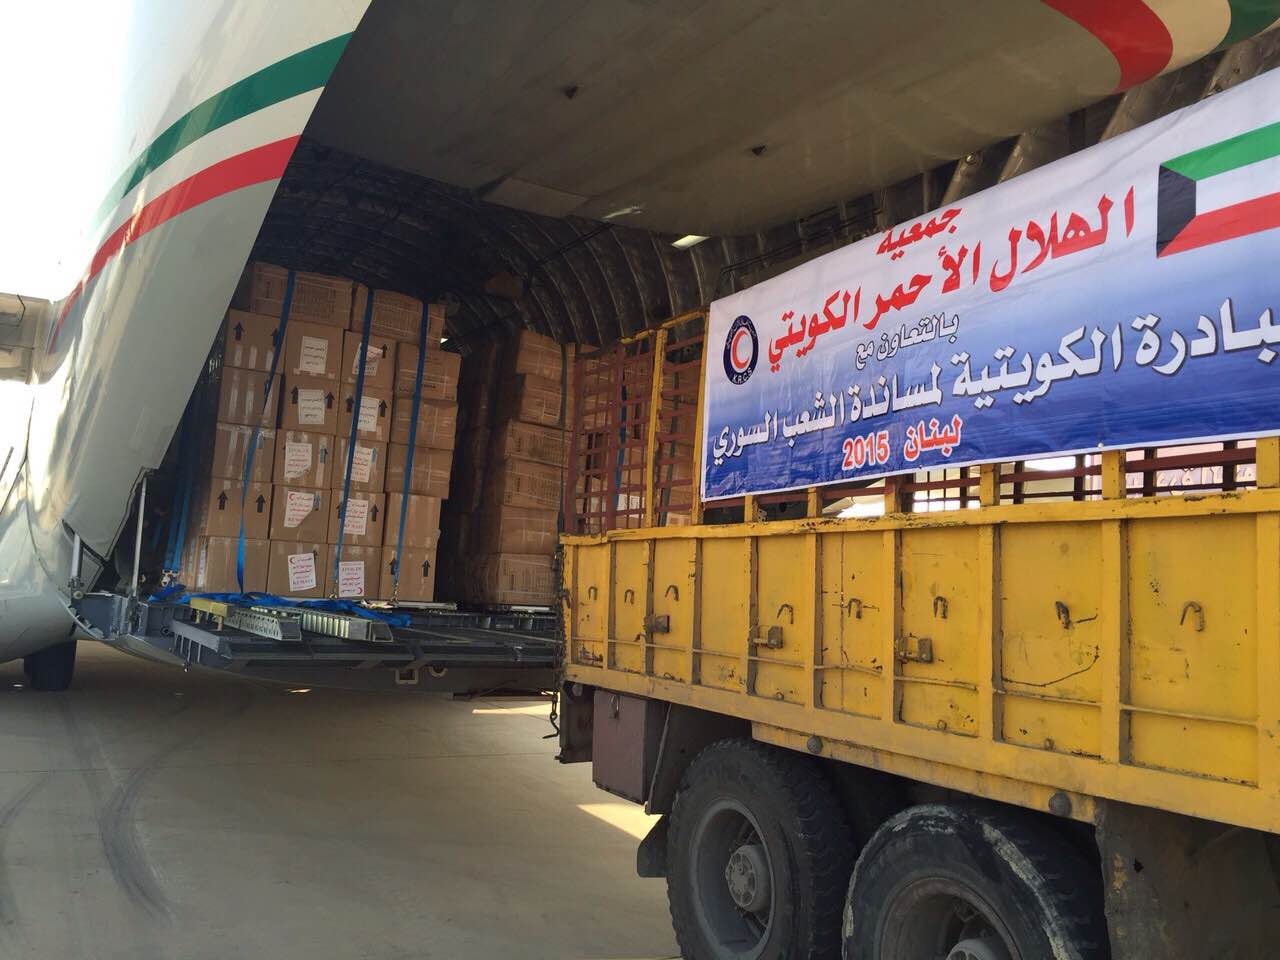 Kuwaiti plane, laden with humanitarian aid, arrives in Beirut